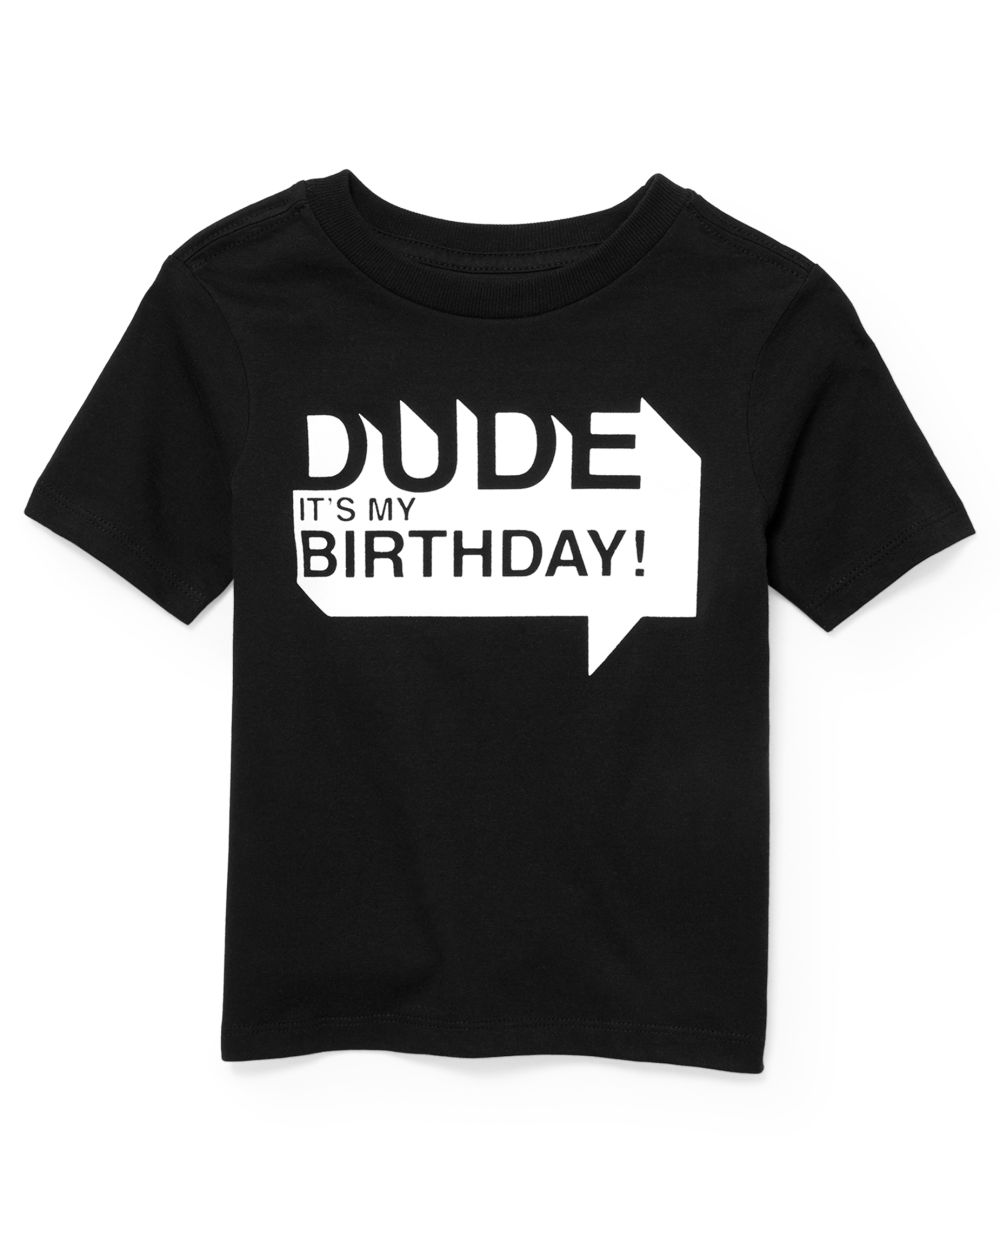 Baby And Toddler Boys Short Sleeve 'Dude It's My Birthday' Graphic Tee